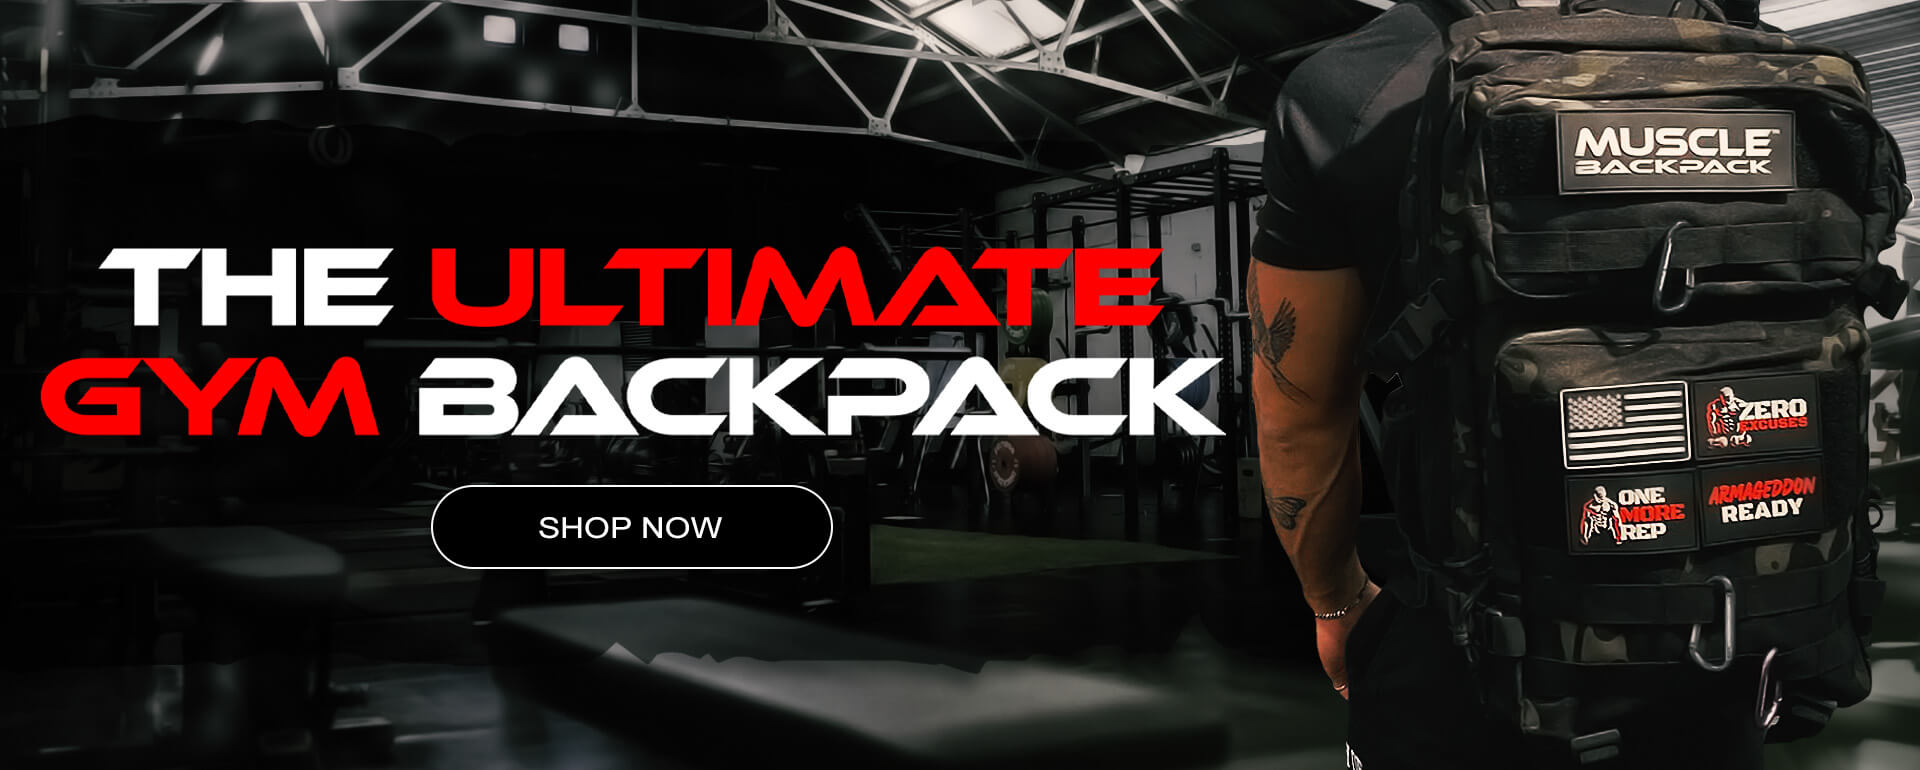 GYM Backpack - Muscle Backpack D (1)